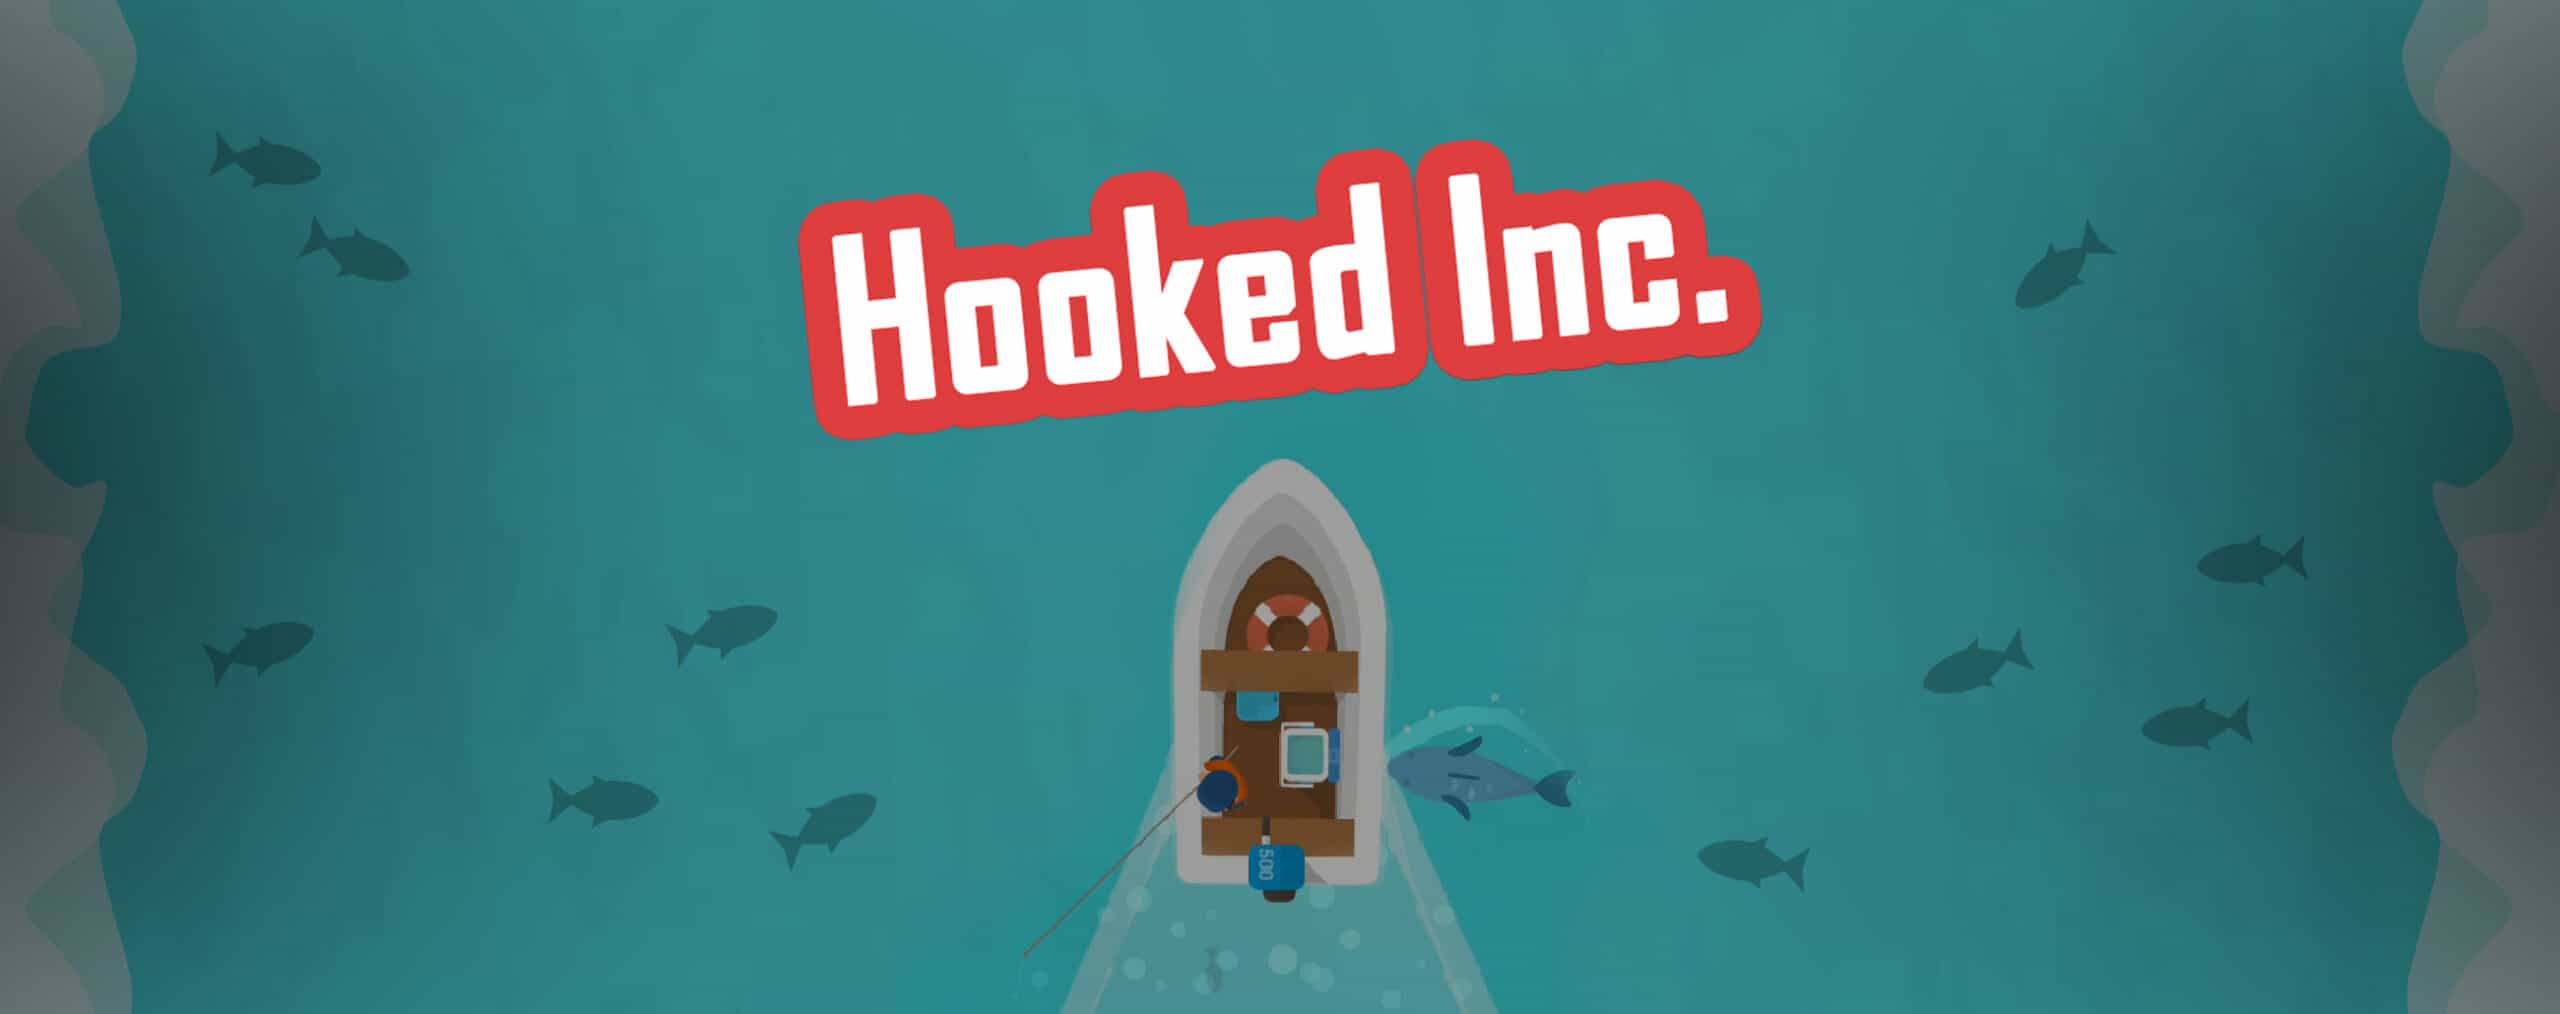 The banner for Hooked Inc.